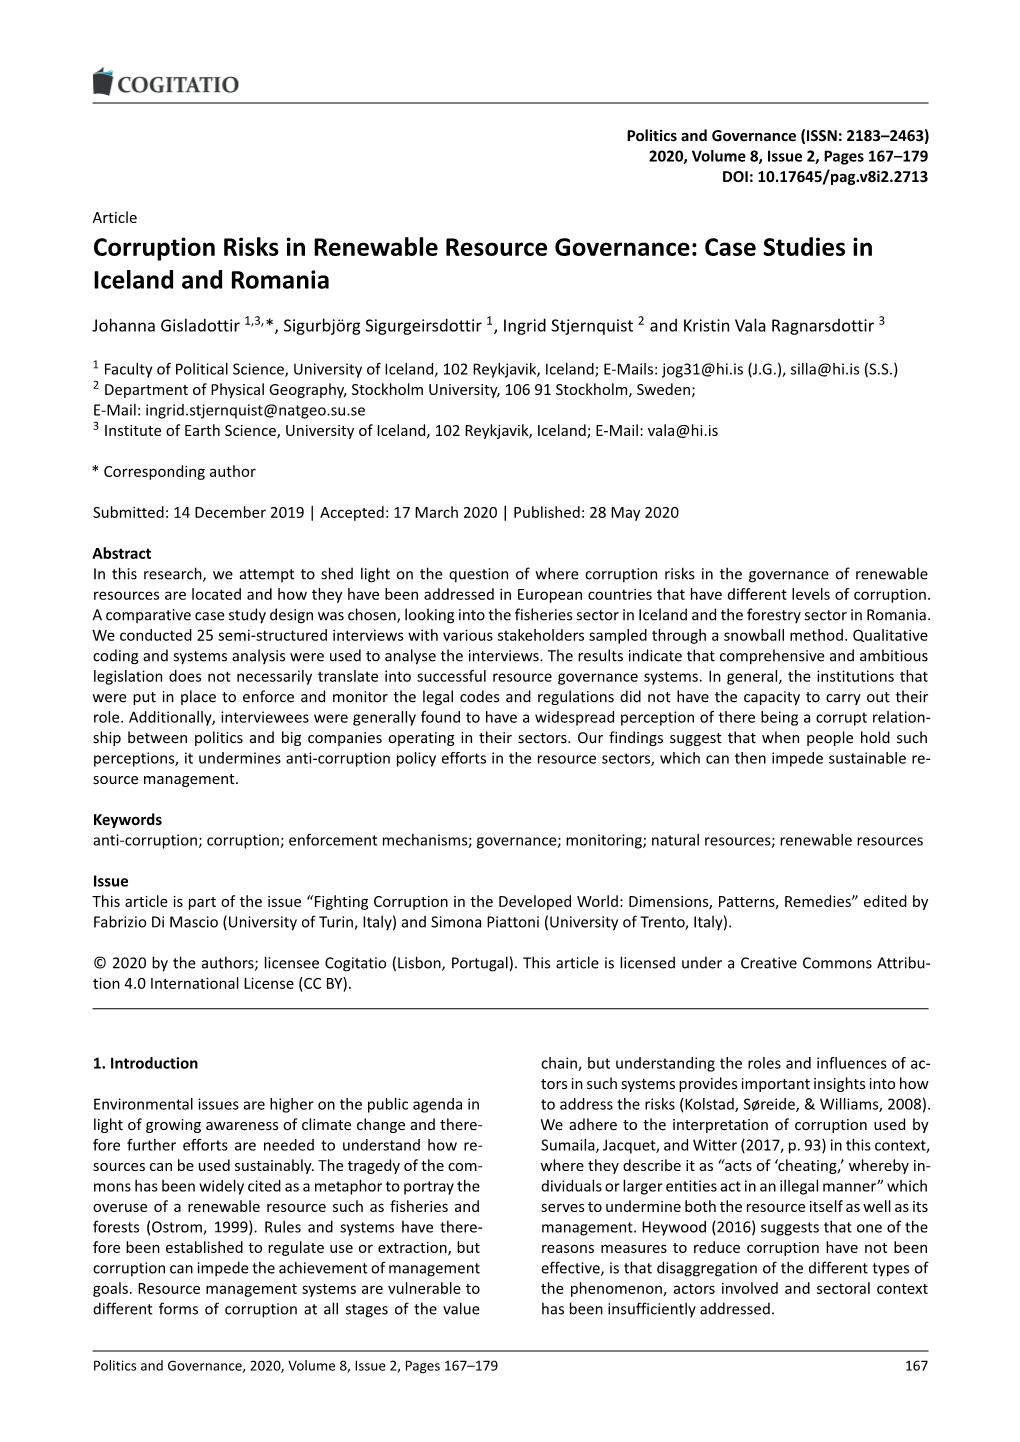 Corruption Risks in Renewable Resource Governance: Case Studies in Iceland and Romania